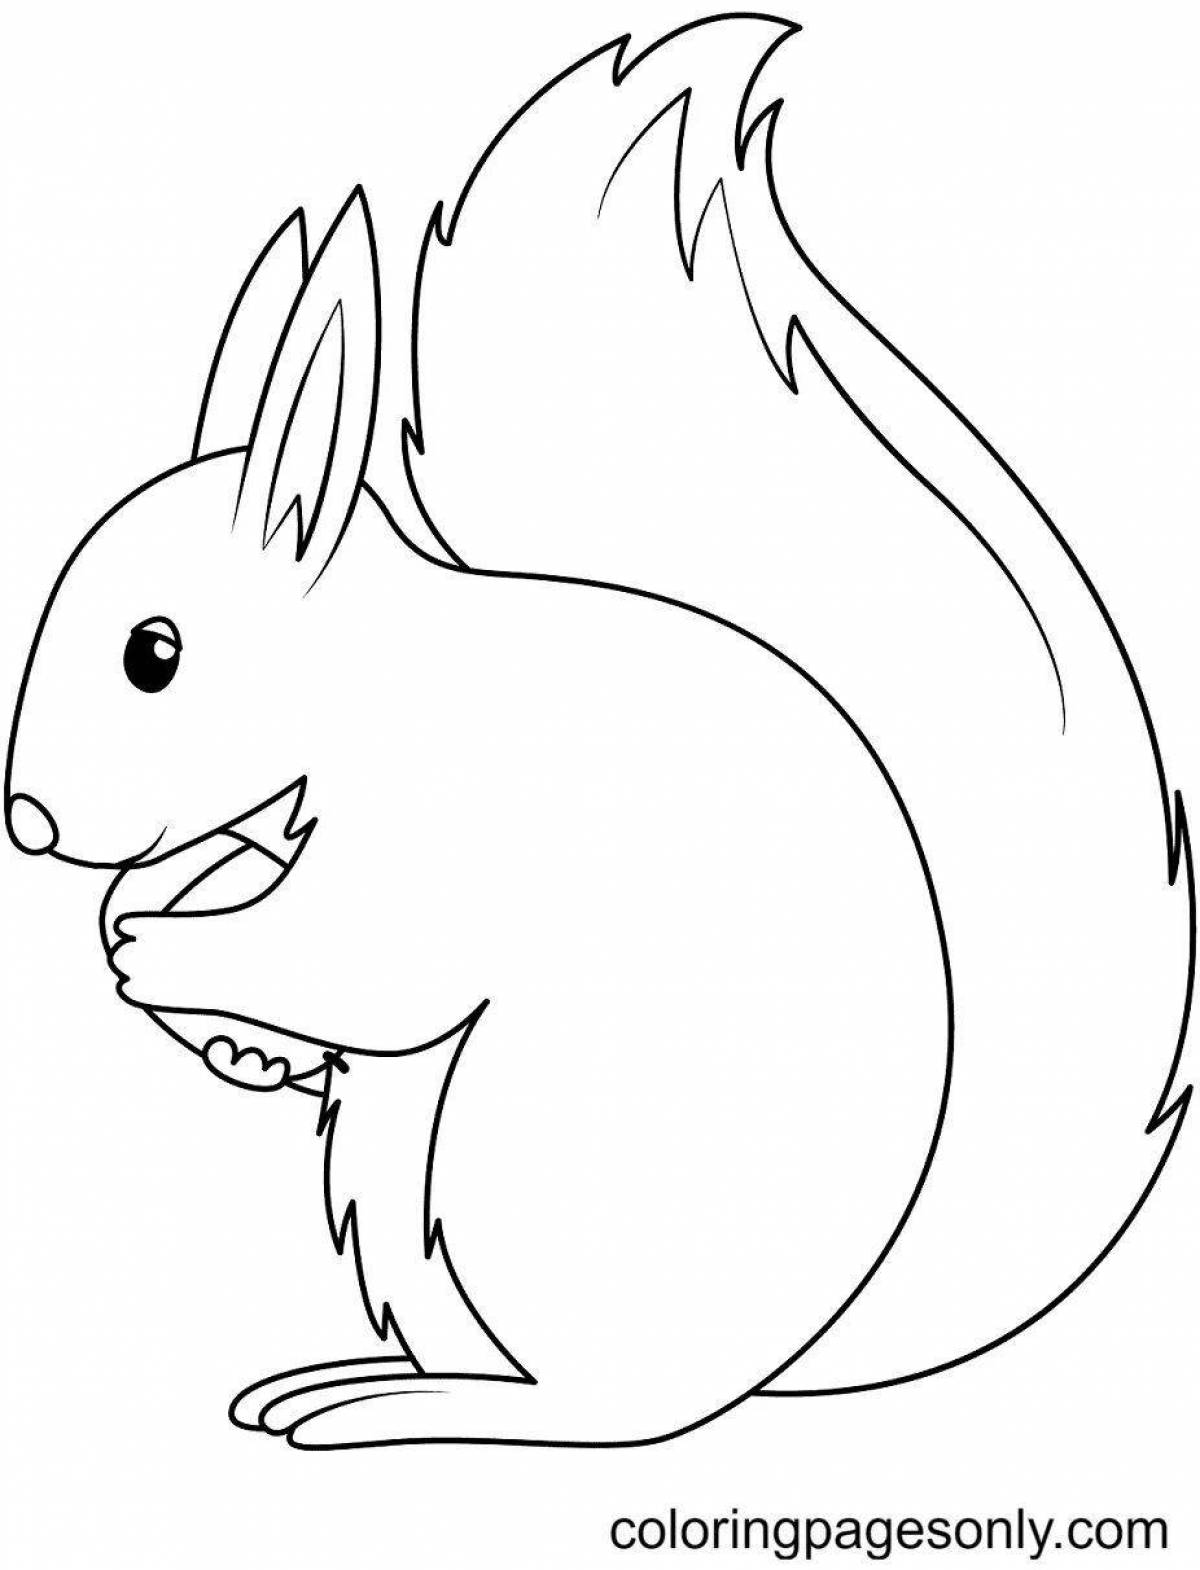 Fun coloring squirrel for 3-4 year olds